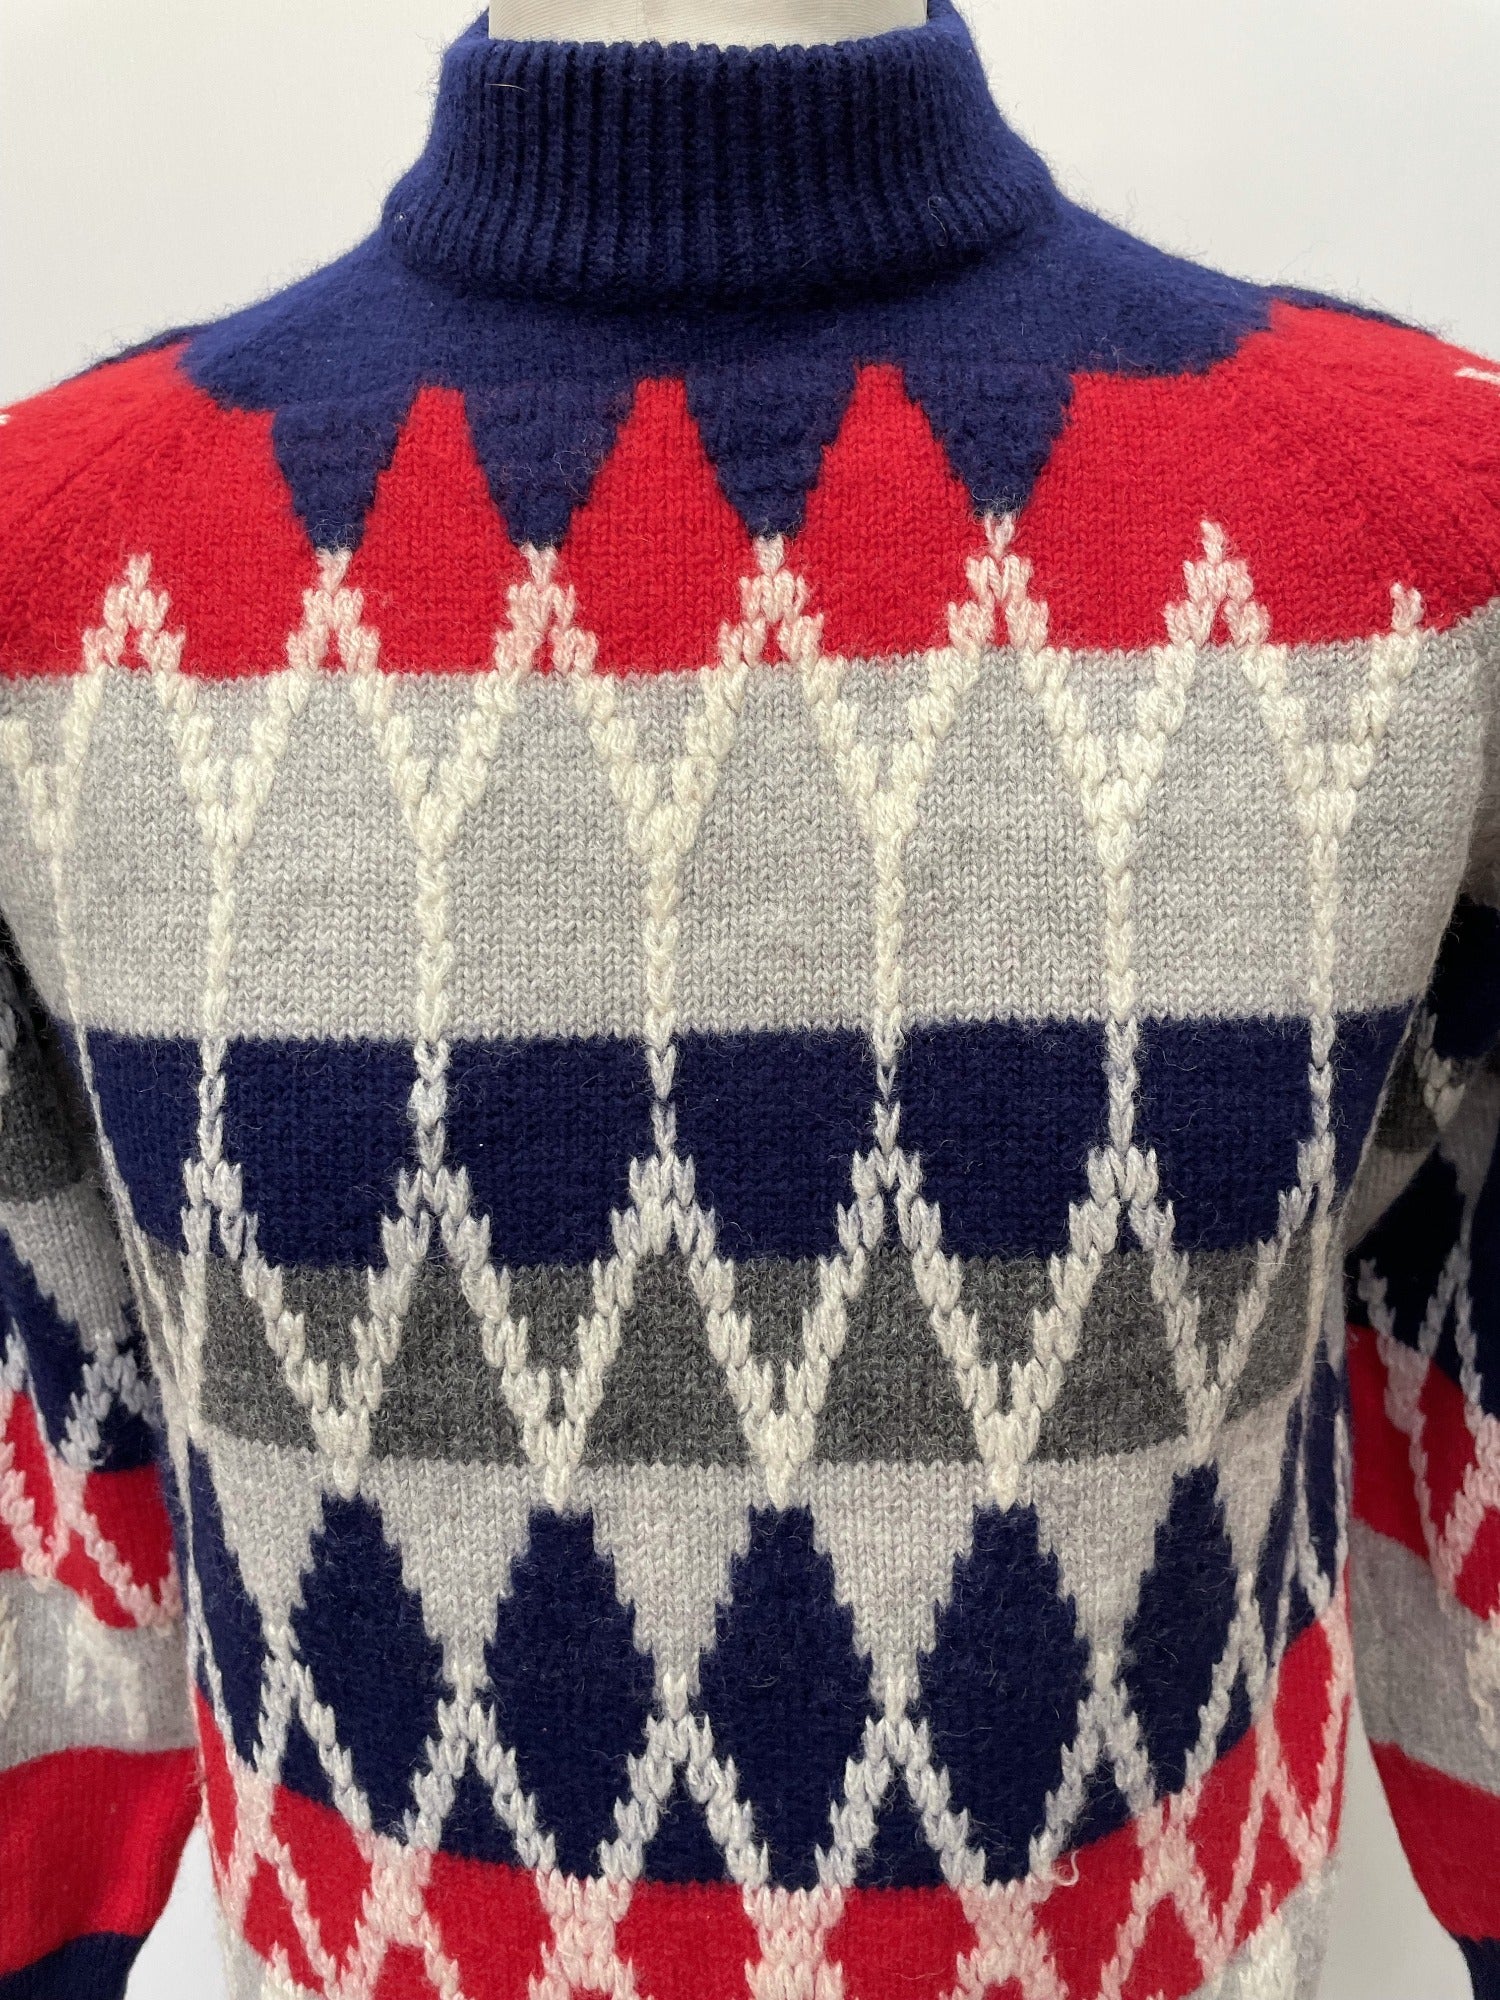 vintage  Urban Village Vintage  urban village  thick  ski jumper  simpsons  roll neck  Red  polo neck  patterned  pattern  mens  M  long sleeve  knitwear  knitted  knit  icelandic  high neck  heavyweight  elasticated  blue  50s  40s  1950s  1940s